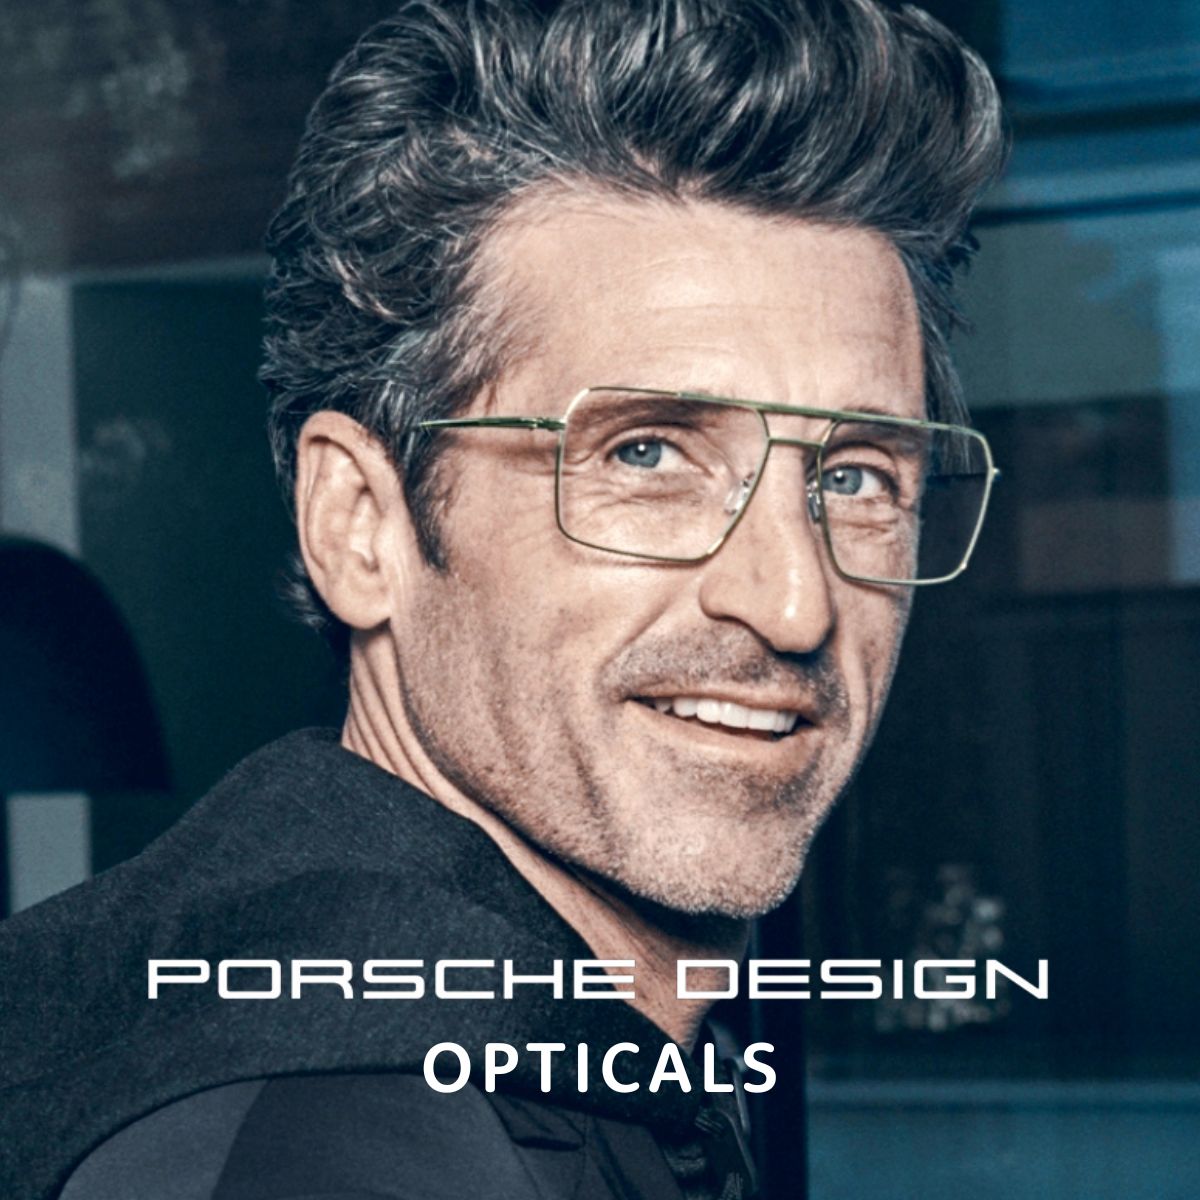 "Explore high-quality Porsche Optical Glasses for men and women at Optorium. Shop affordable luxury and customizable frames online."